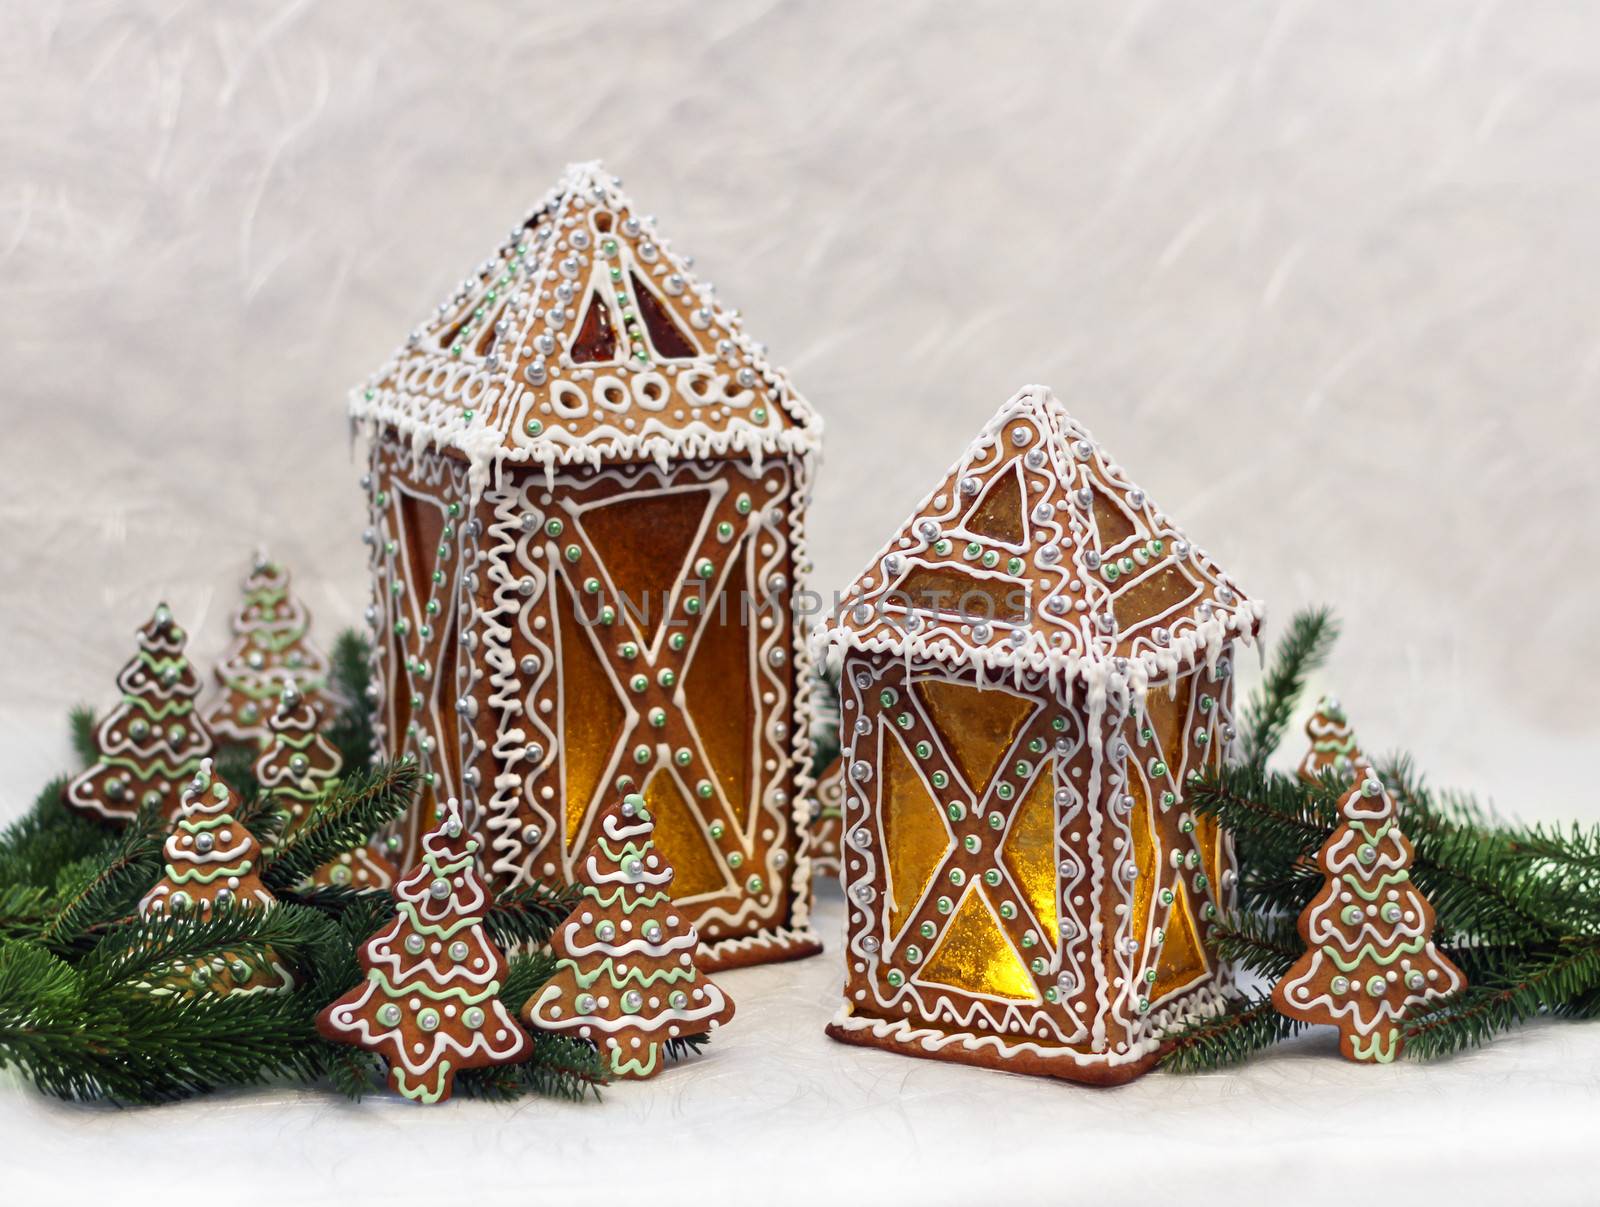 Gingerbread lantern cottages with Christmas tree branches